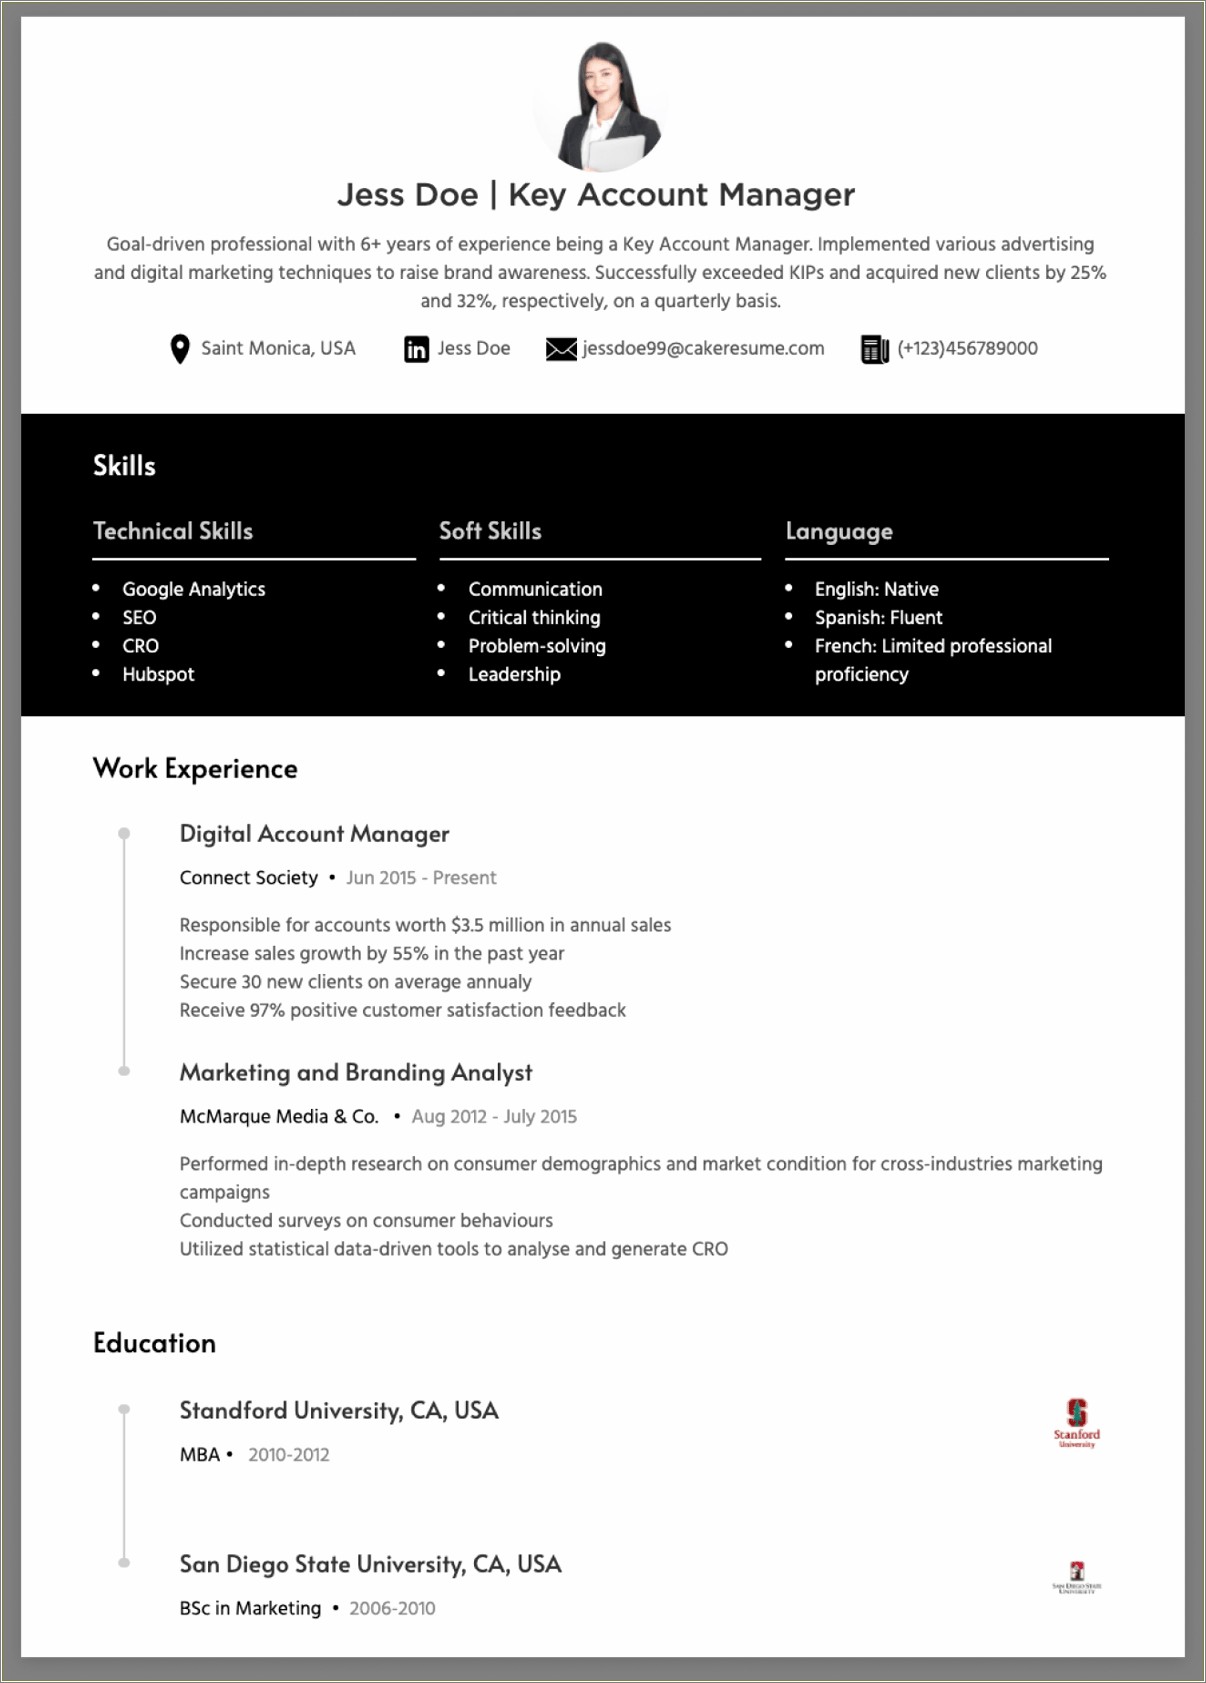 Resume With Little Experience Summary Statement